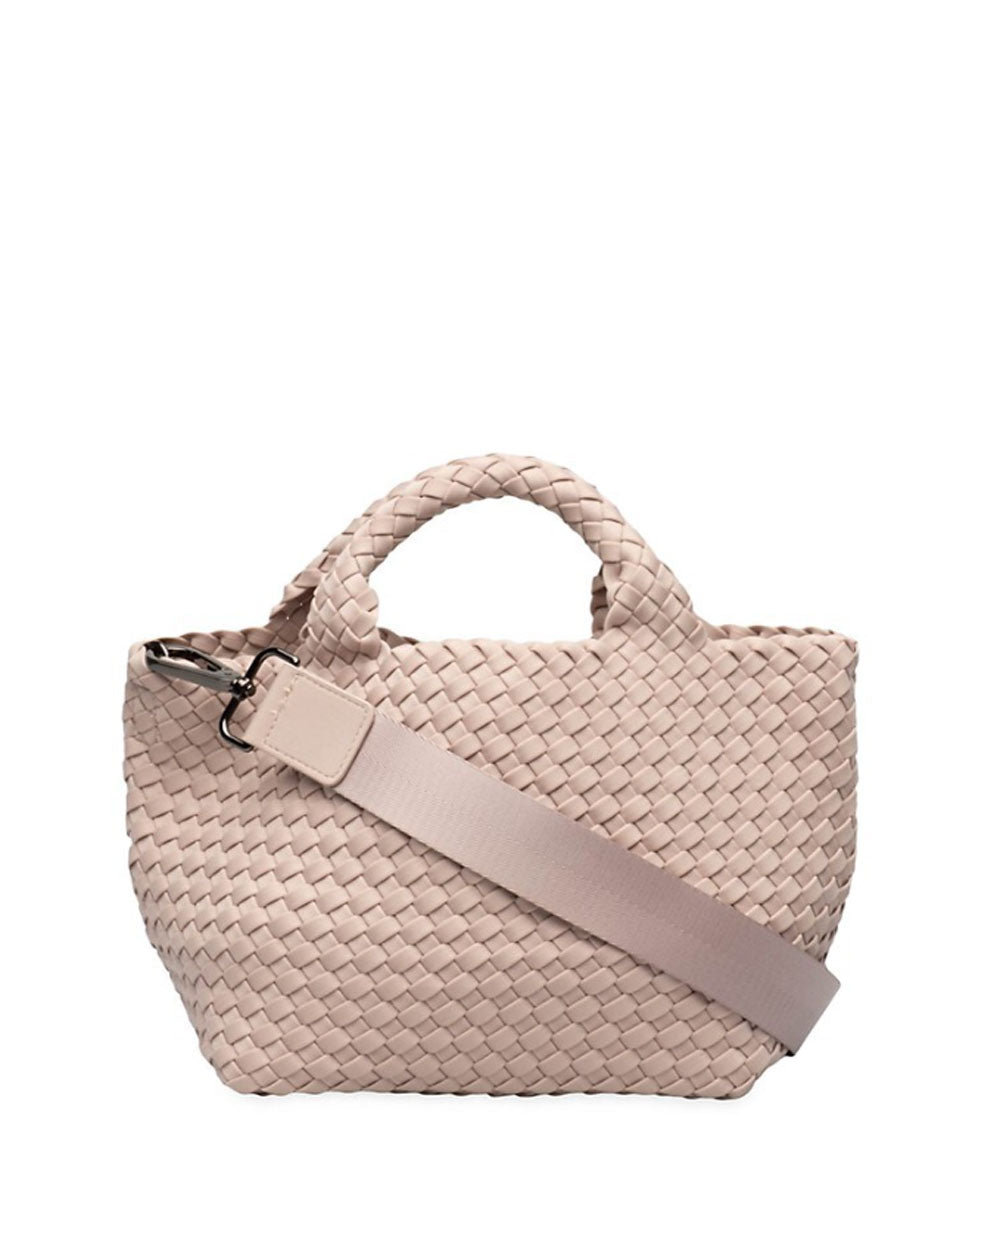 St. Barths Mini Tote in Shell Pink